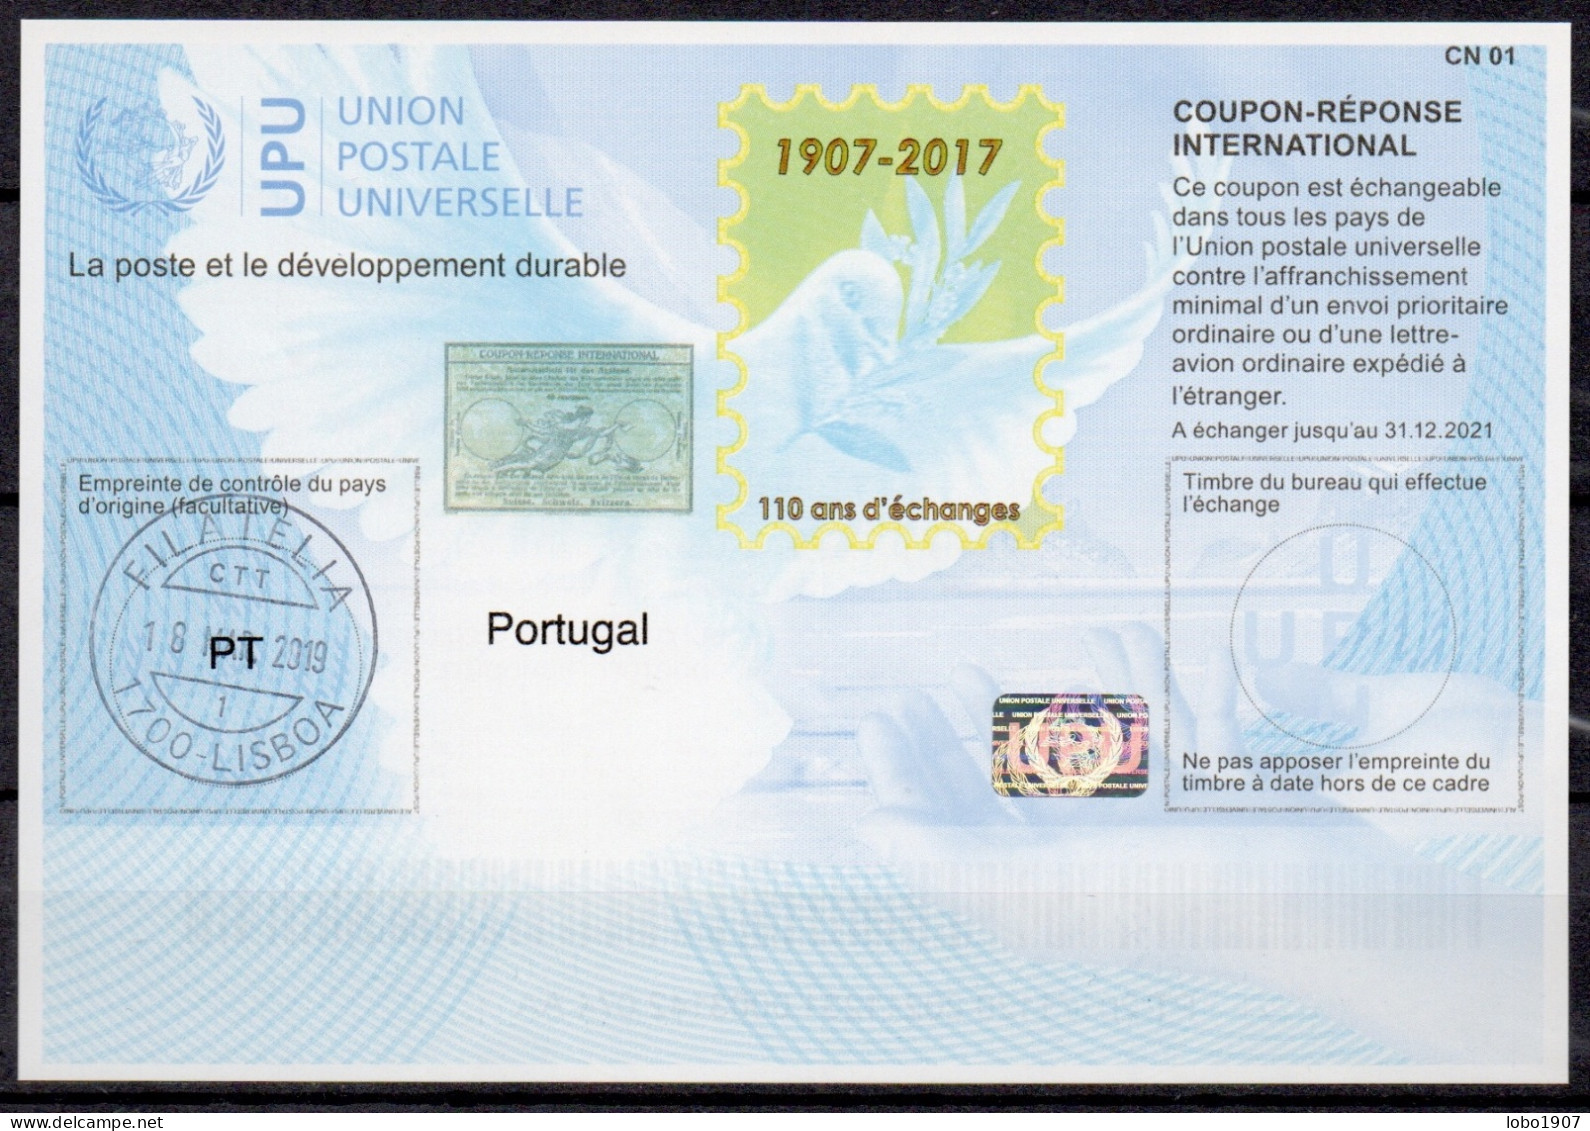 PORTUGAL  Is42  20171120 AA International Reply Coupon Reponse Antwortschein Cupao Resposta IRC IAS  O LISBOA 18.03.2019 - Entiers Postaux